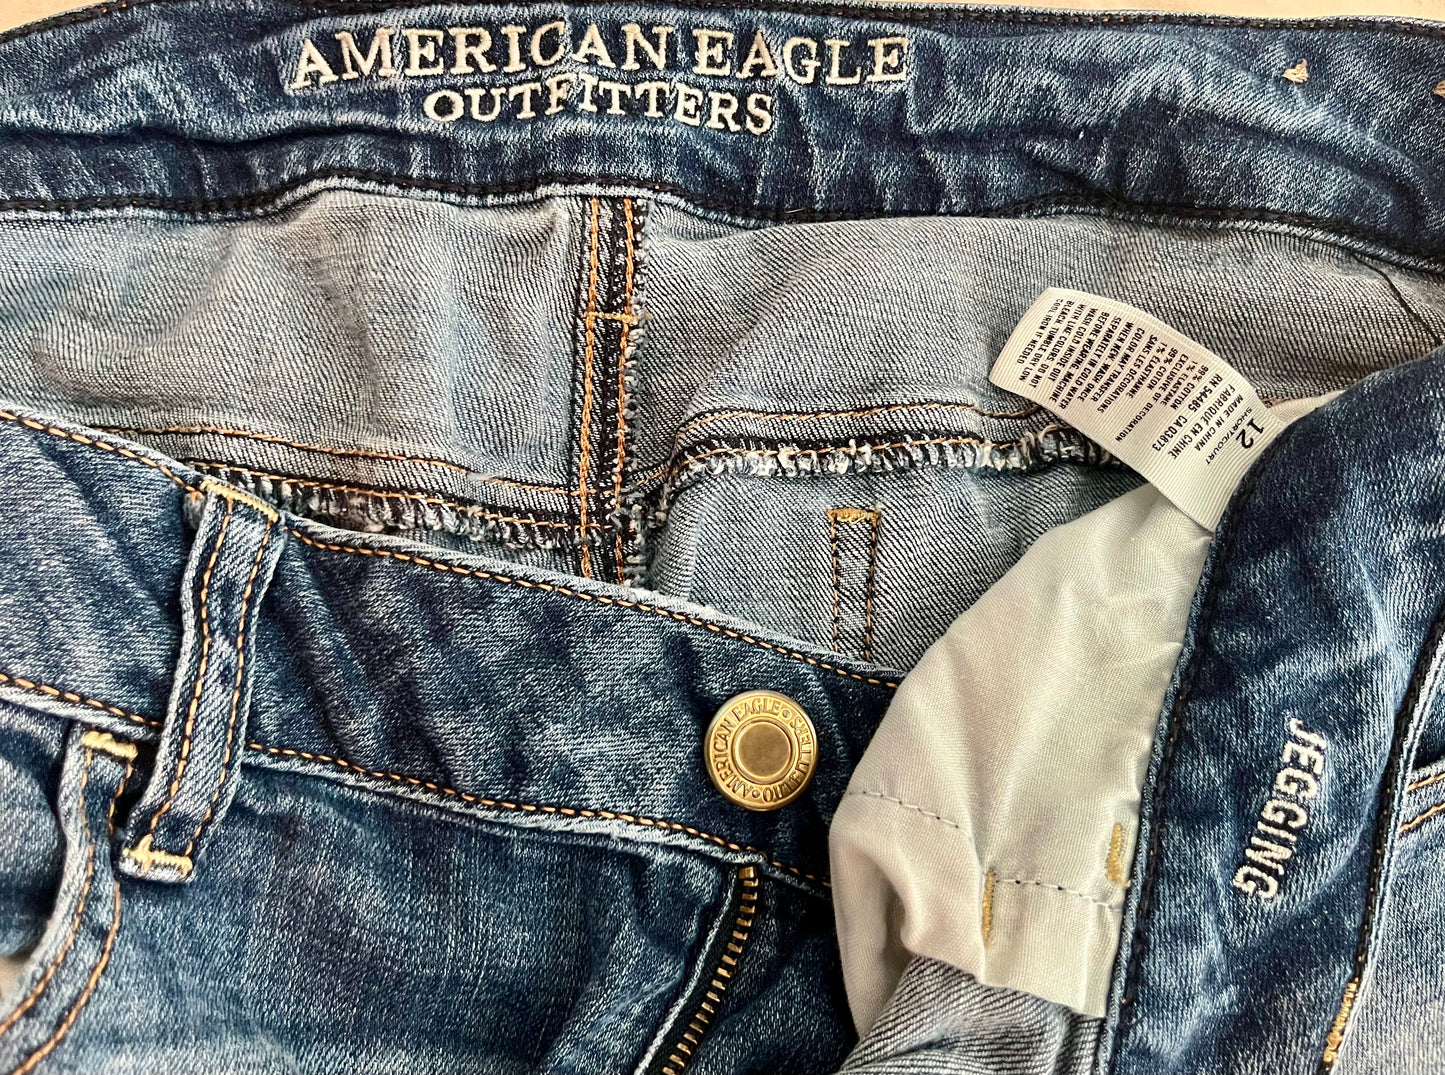 American Eagle Basic Jegging, Size 12 Short - Tales from the Tangle